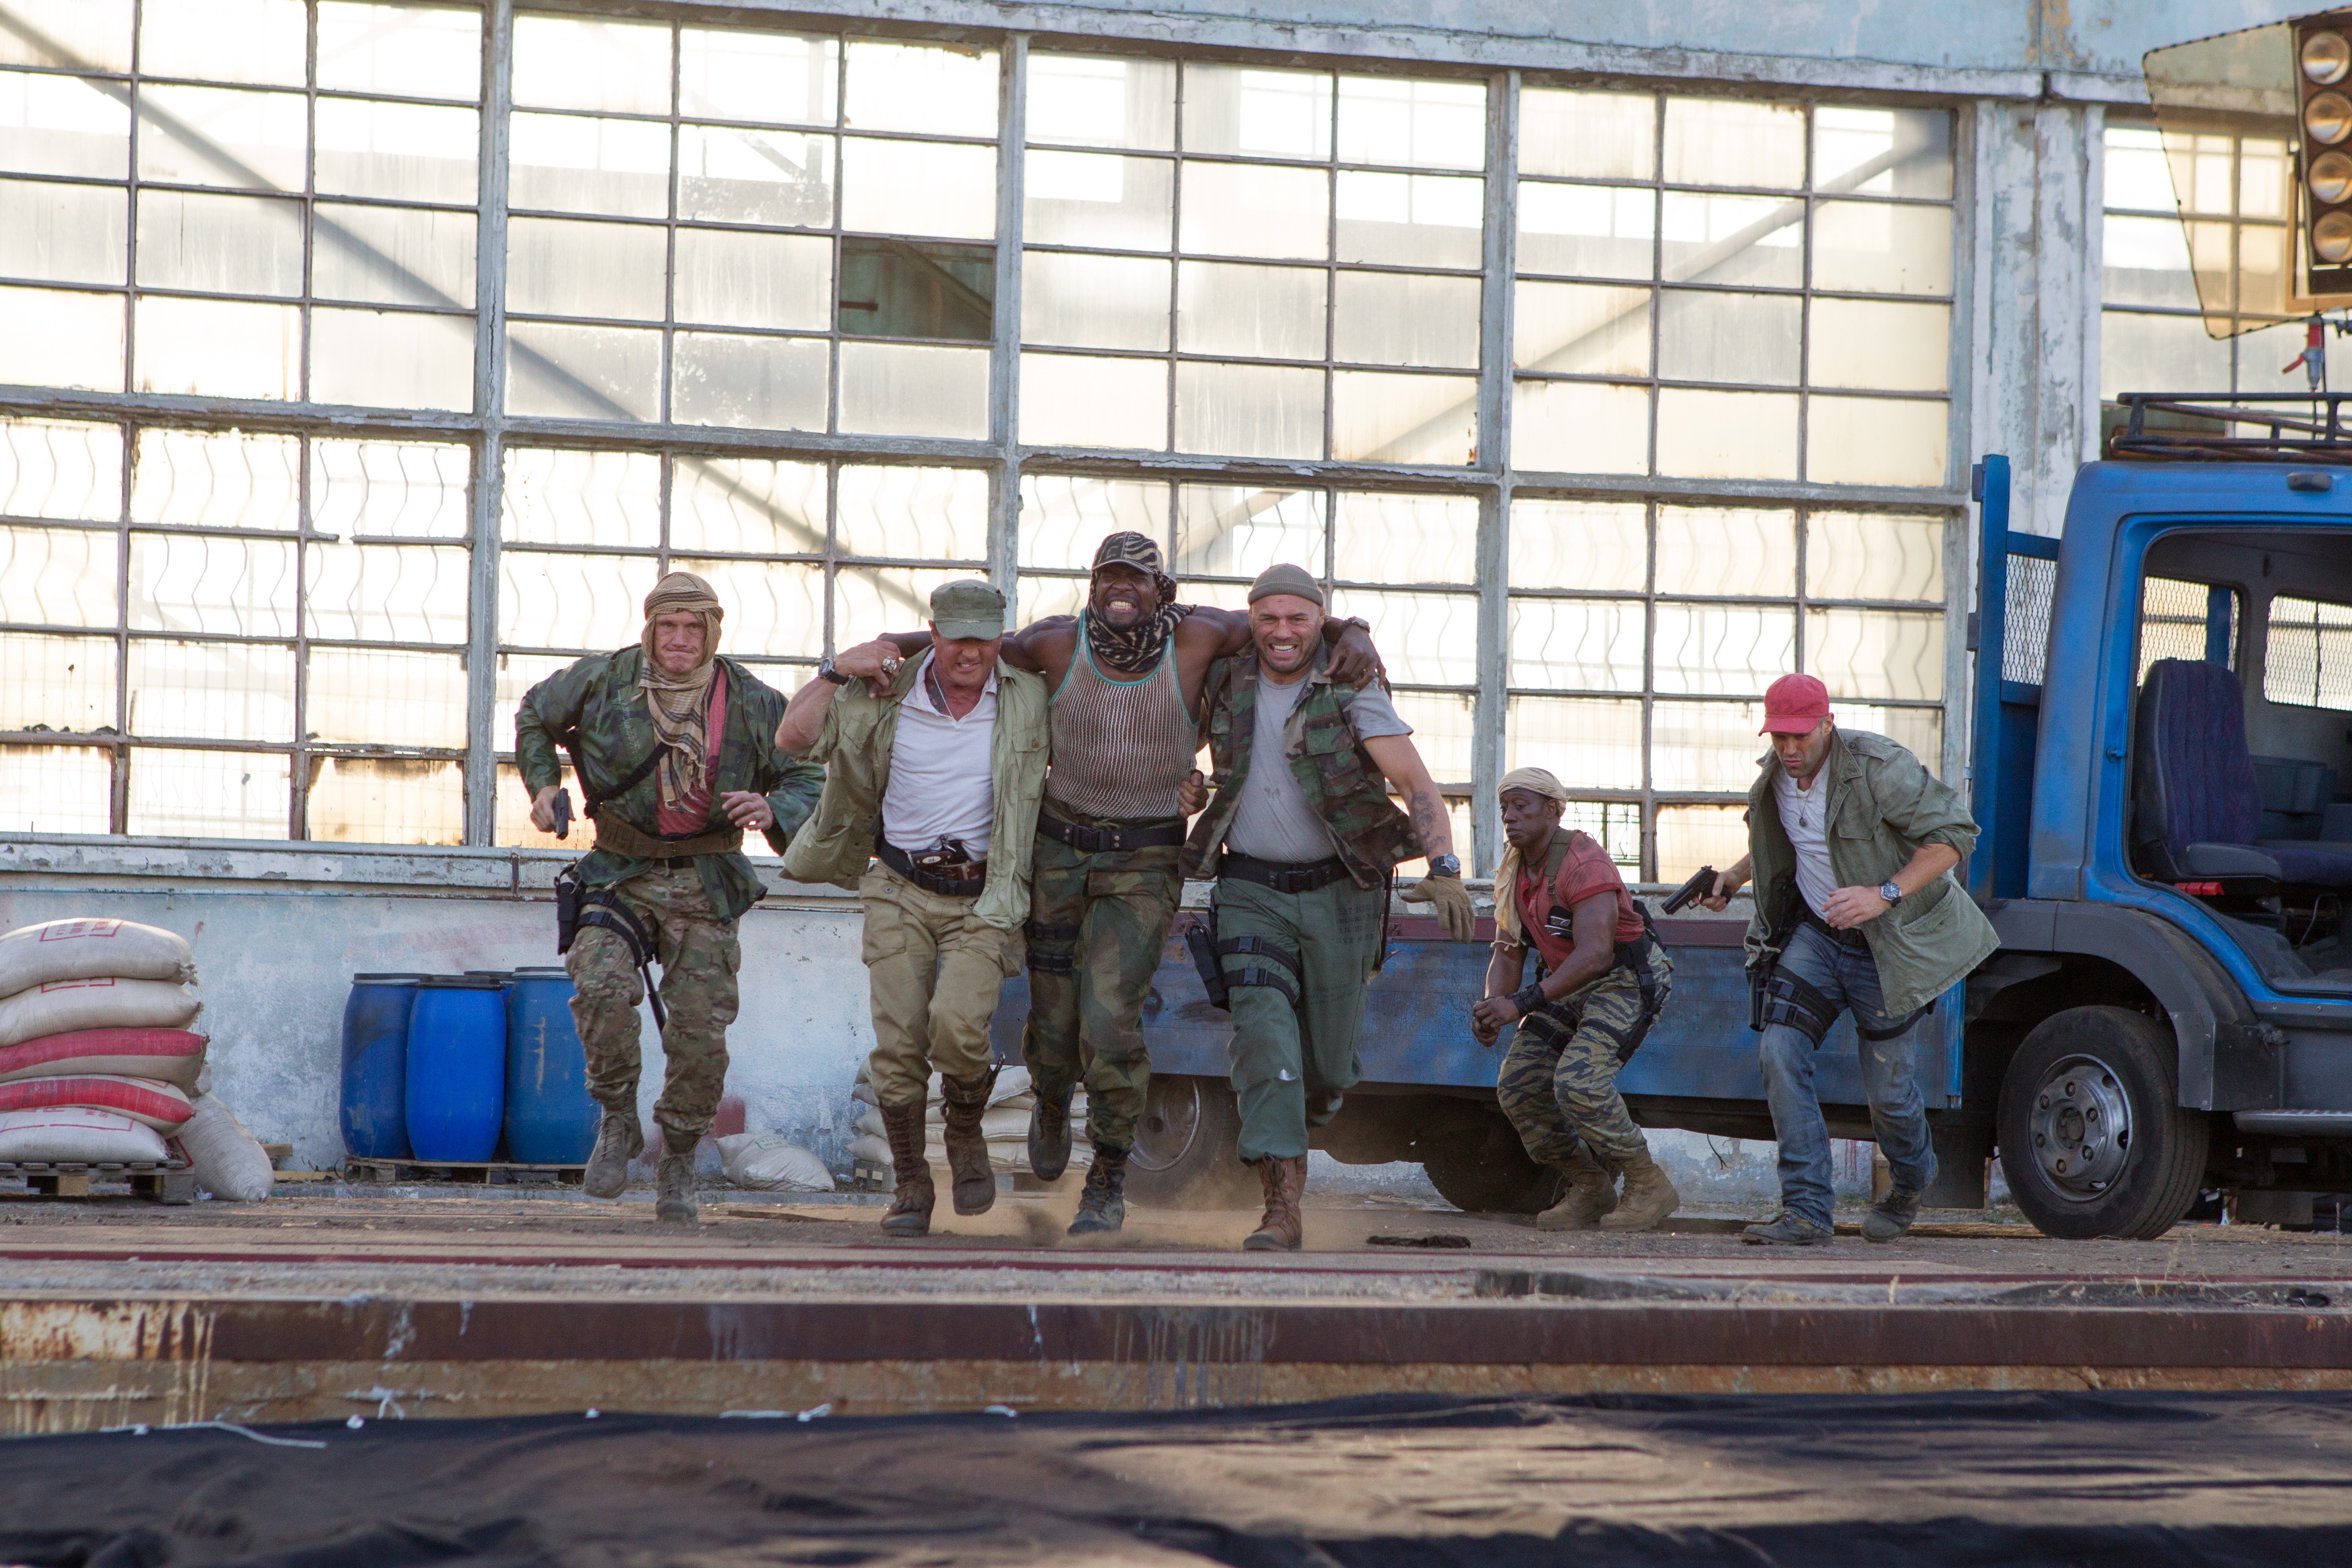 movie, the expendables 3, barney ross, doc (the expendables), dolph lundgren, gunnar jensen, hale caesar, jason statham, lee christmas, randy couture, sylvester stallone, terry crews, toll road, wesley snipes, the expendables